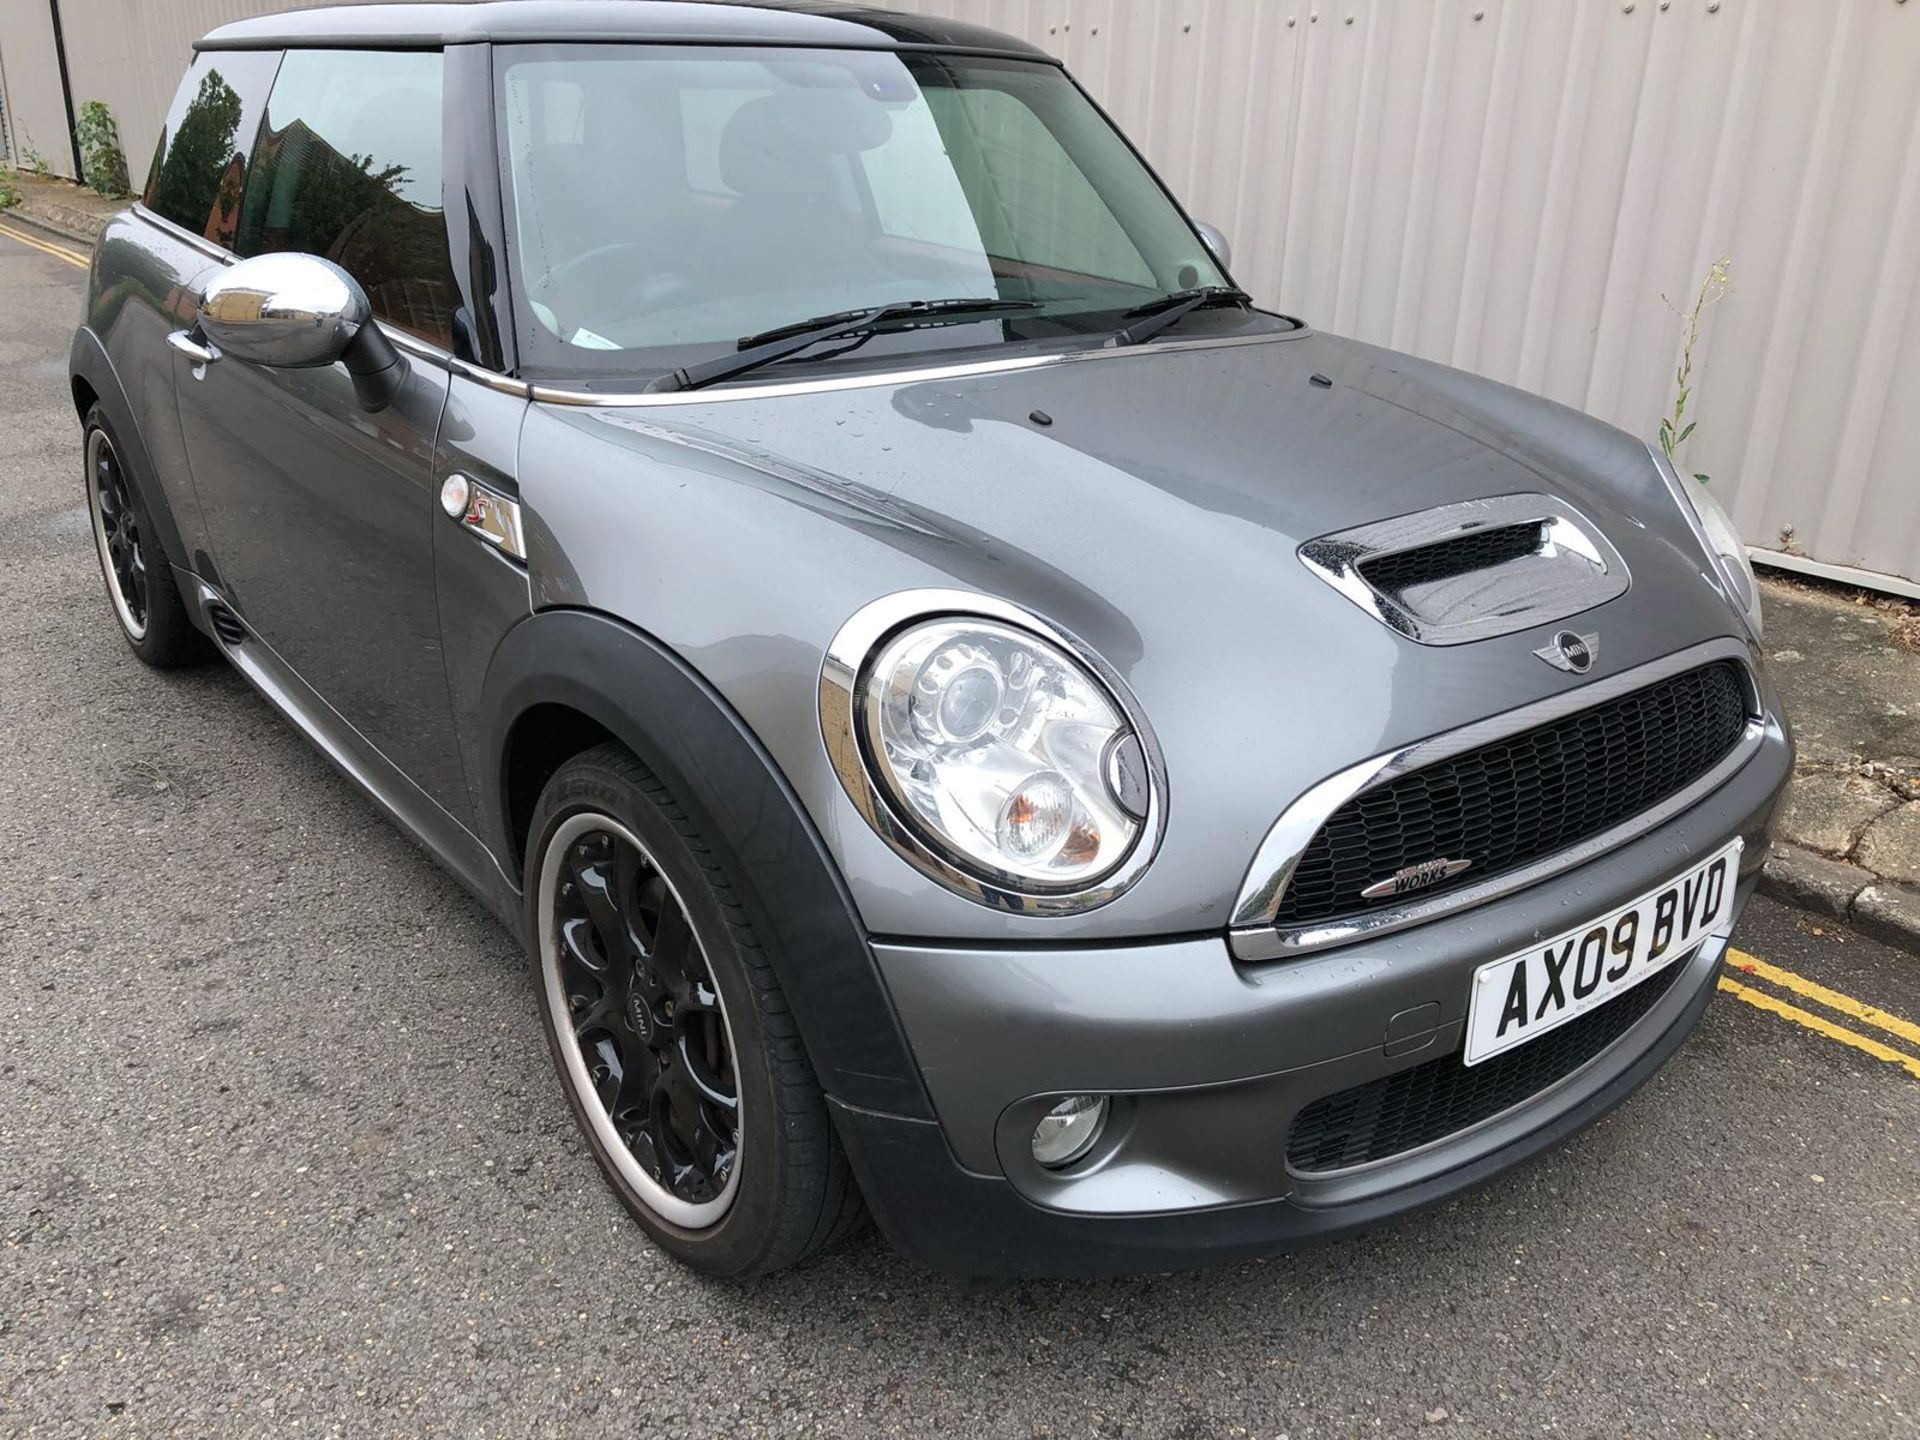 MINI COOPER S JOHN WORKS. 2009/09. 79,000 miles. Full history with 9 stamps in the book. - Image 2 of 19